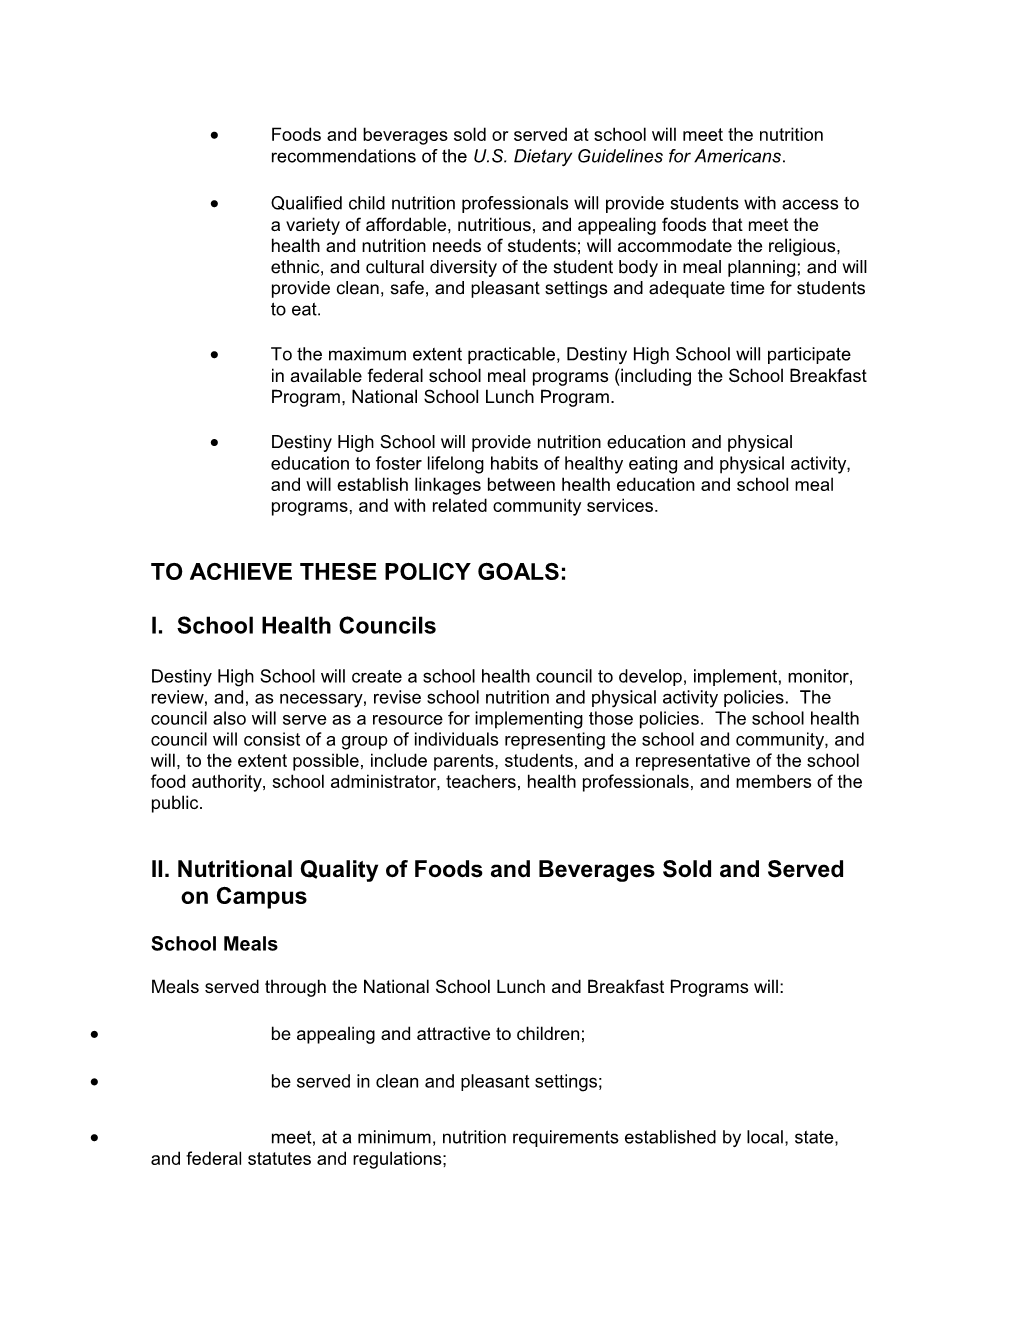 DLH Academy Wellness Policies on Physical Activity and Nutrition